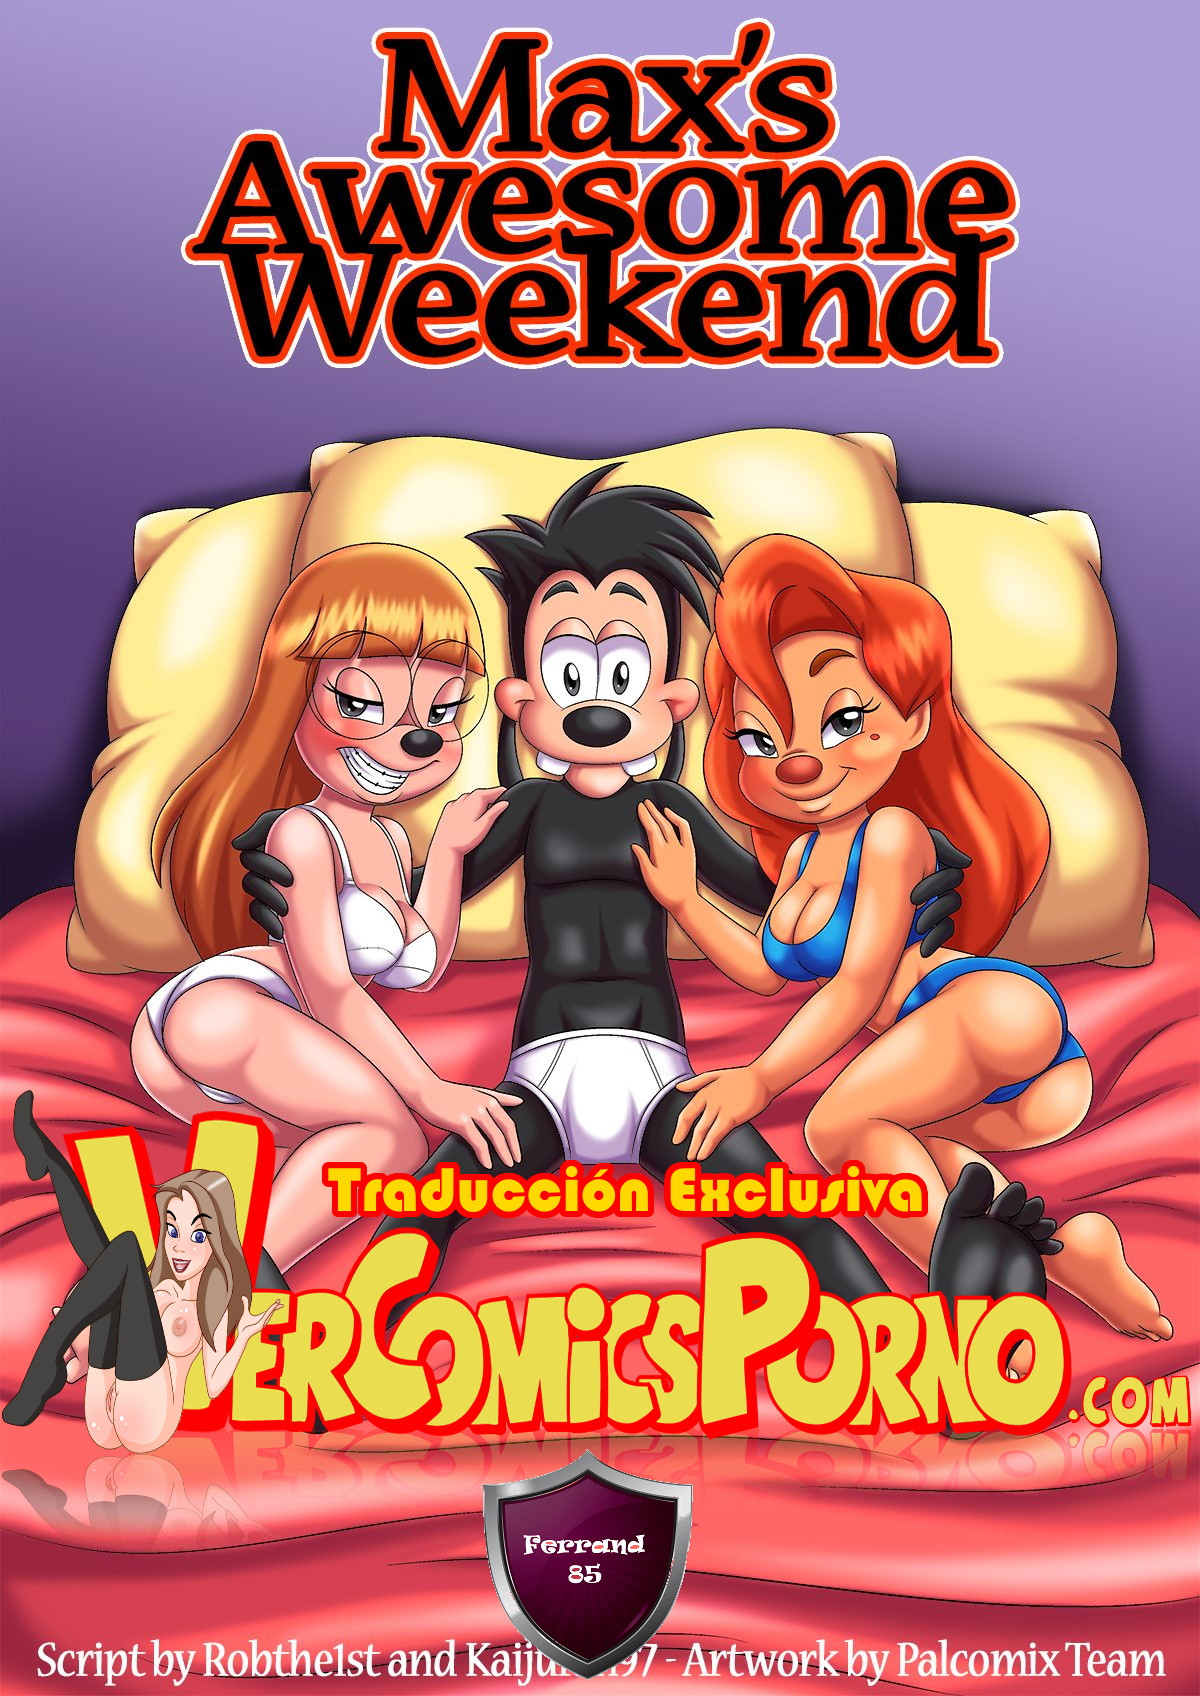 Max’s awesome weekend – Palcomix - 0